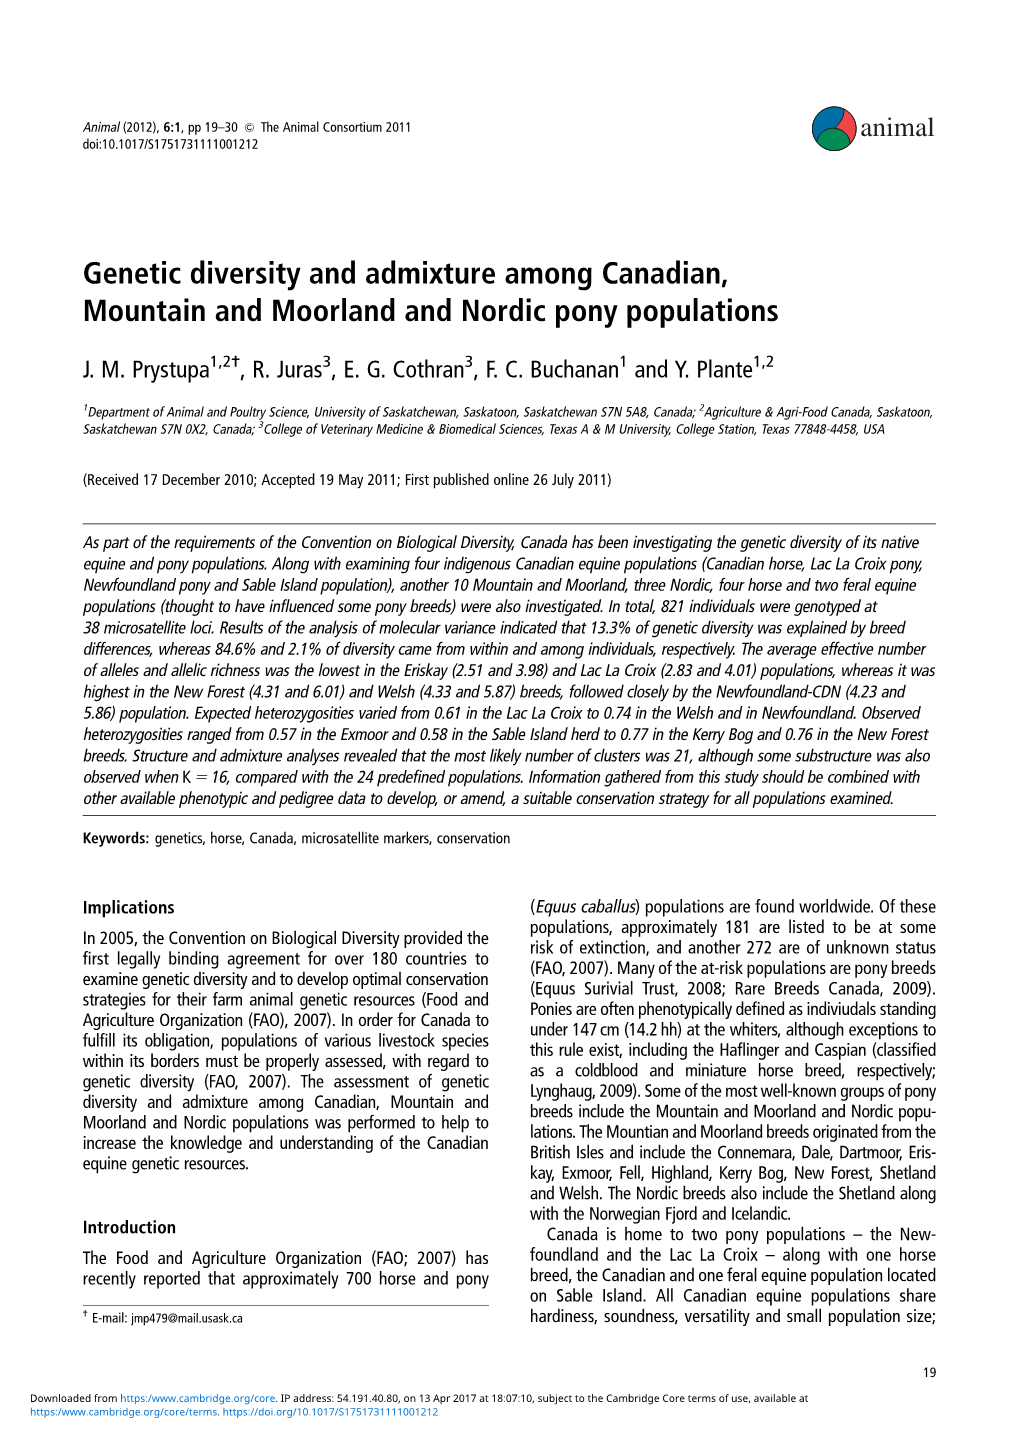 Genetic Diversity and Admixture Among Canadian, Mountain and Moorland and Nordic Pony Populations